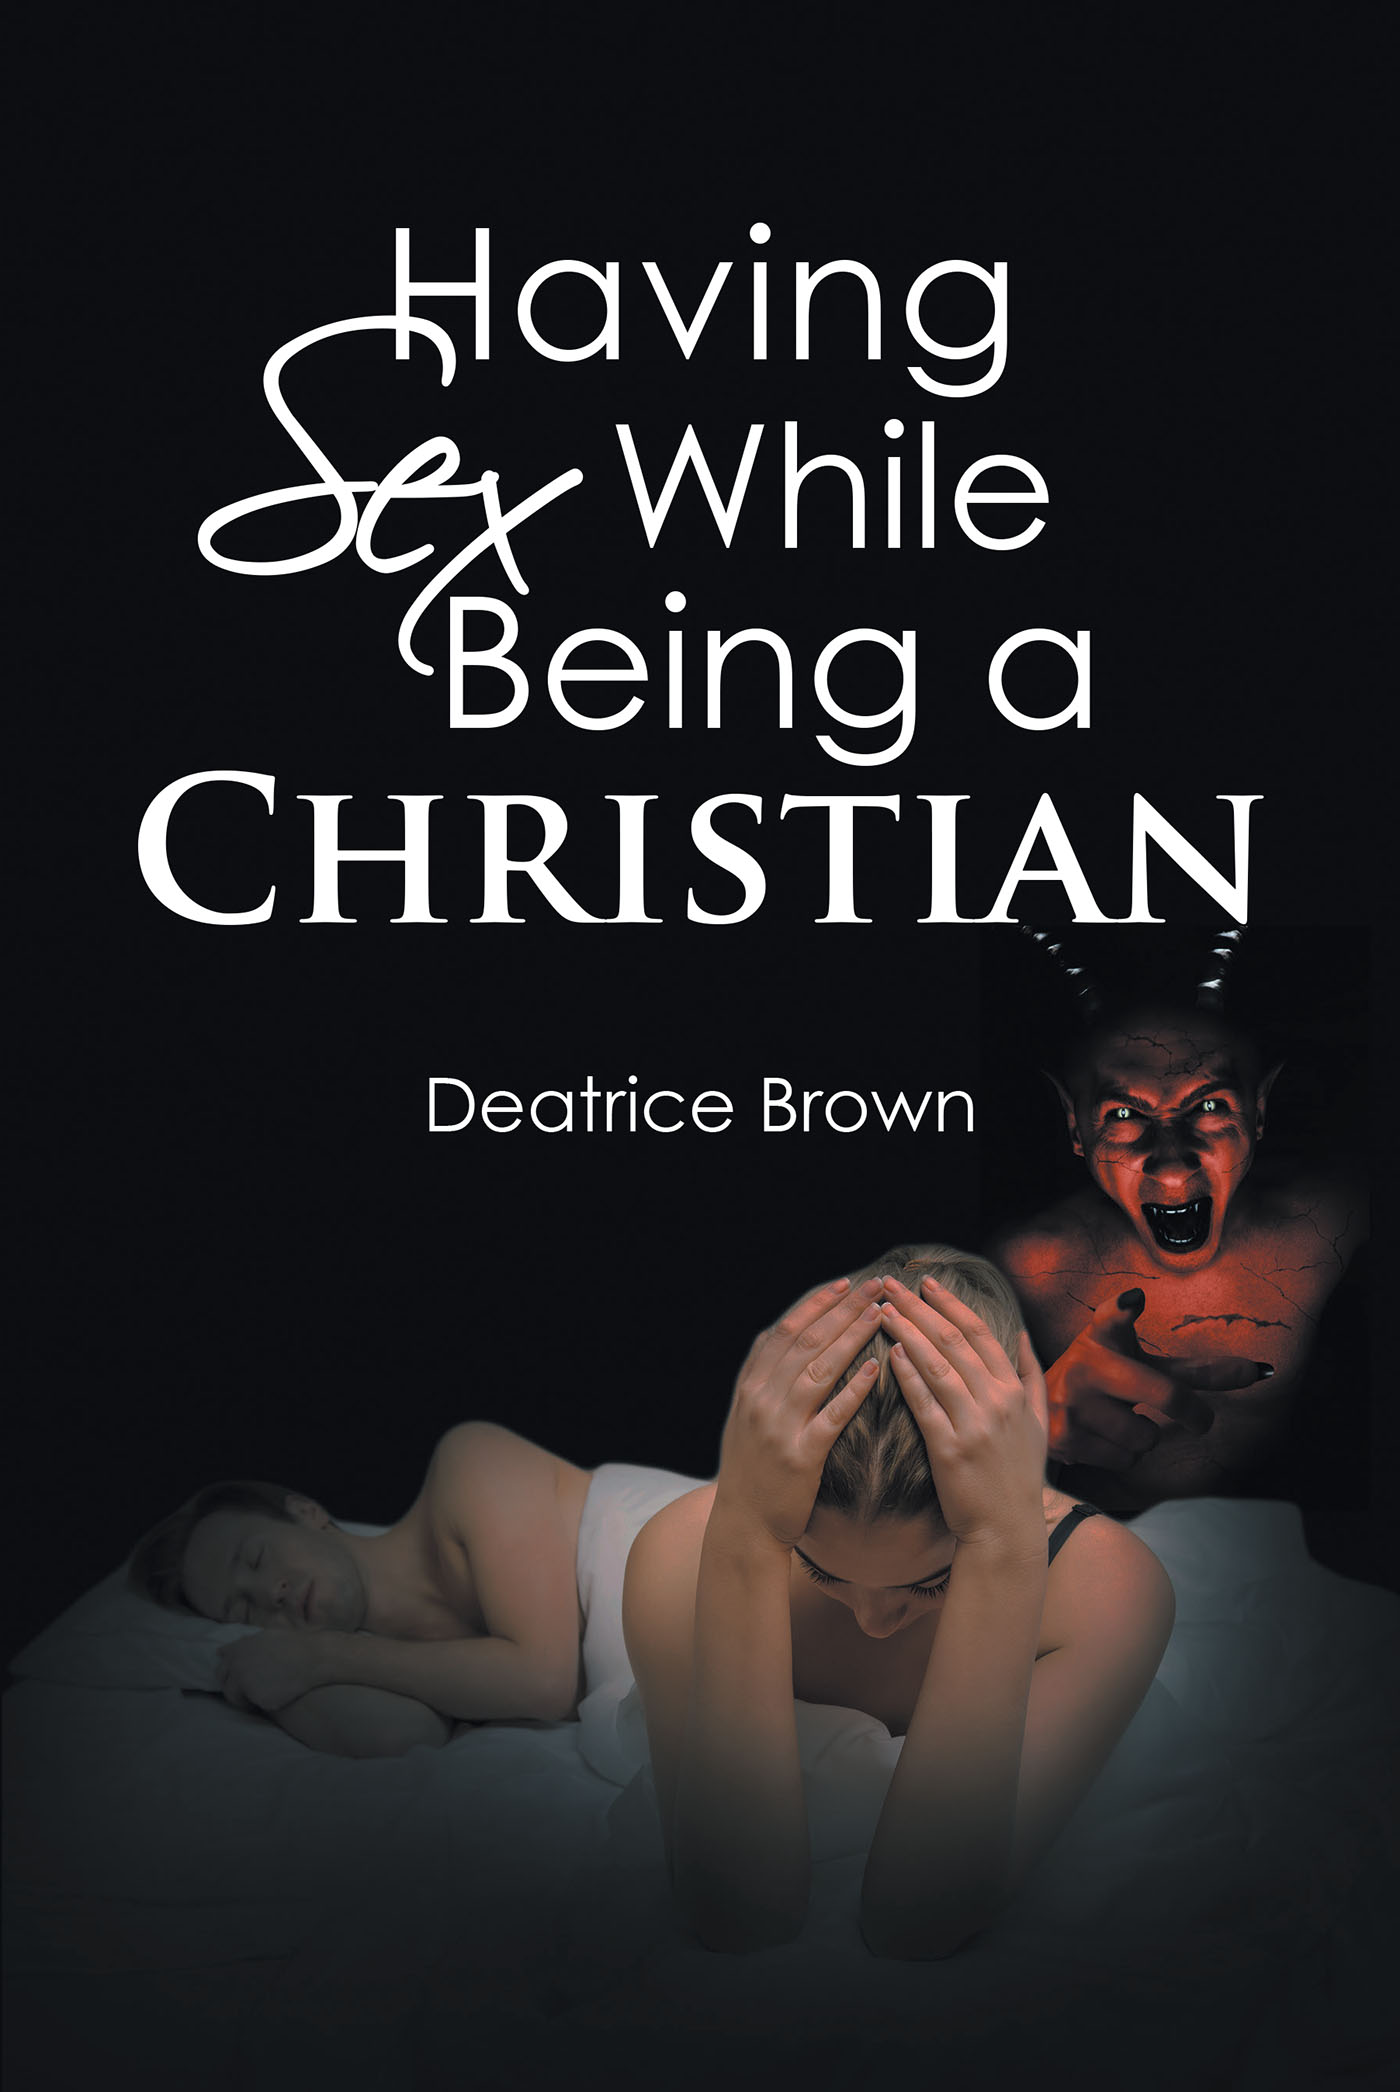 Deatrice Browns New Book Having Sex While Being a Christian is a Guide to Developing an Understanding of Physical Intimacy While Practicing the Christian Faith Newswire